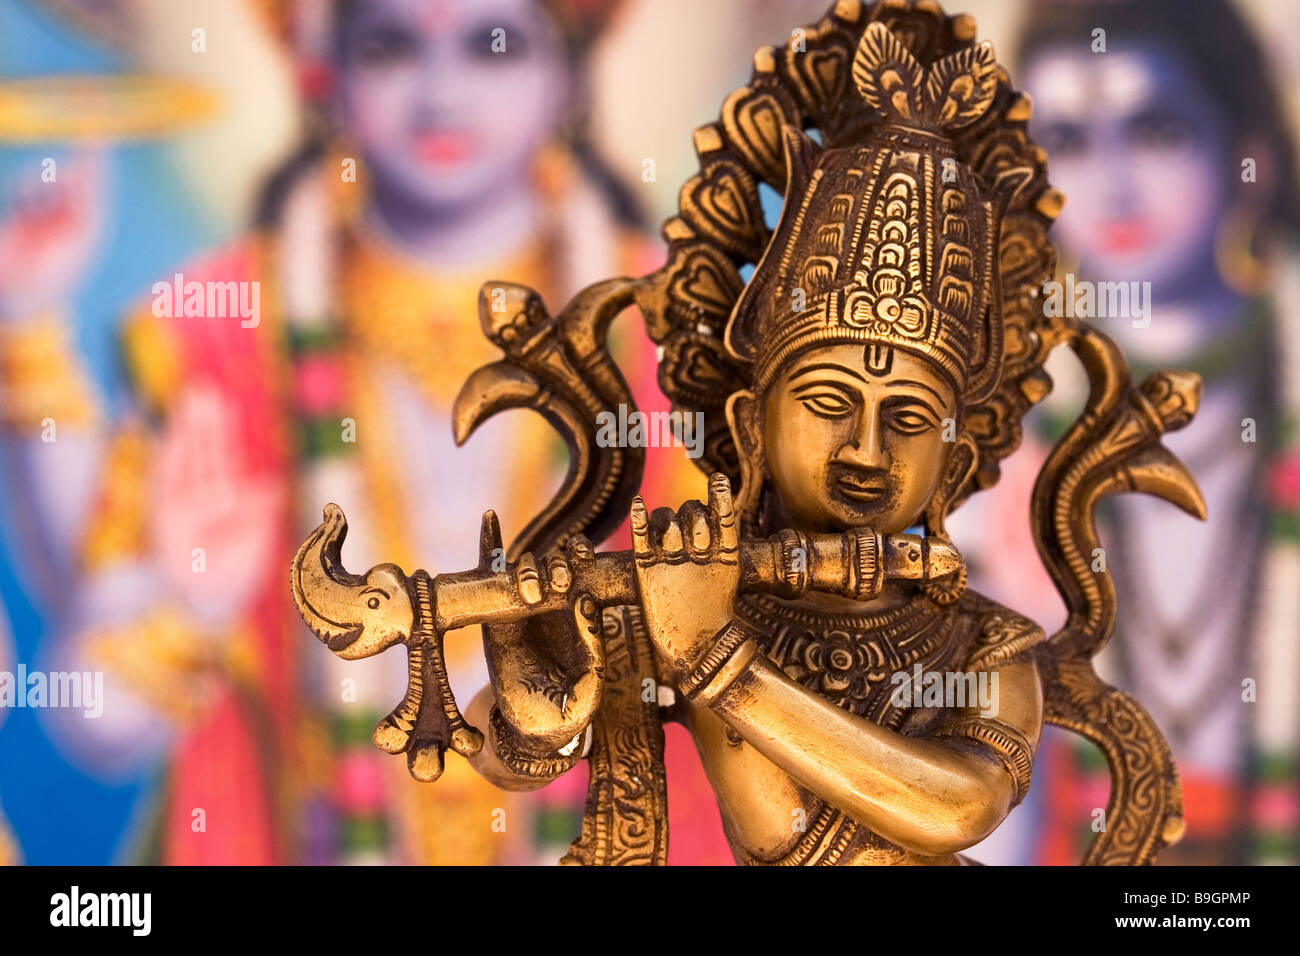 Metal Statue of Indian God Krishna Playing Flute with Colourful Indian Background Stock Photo